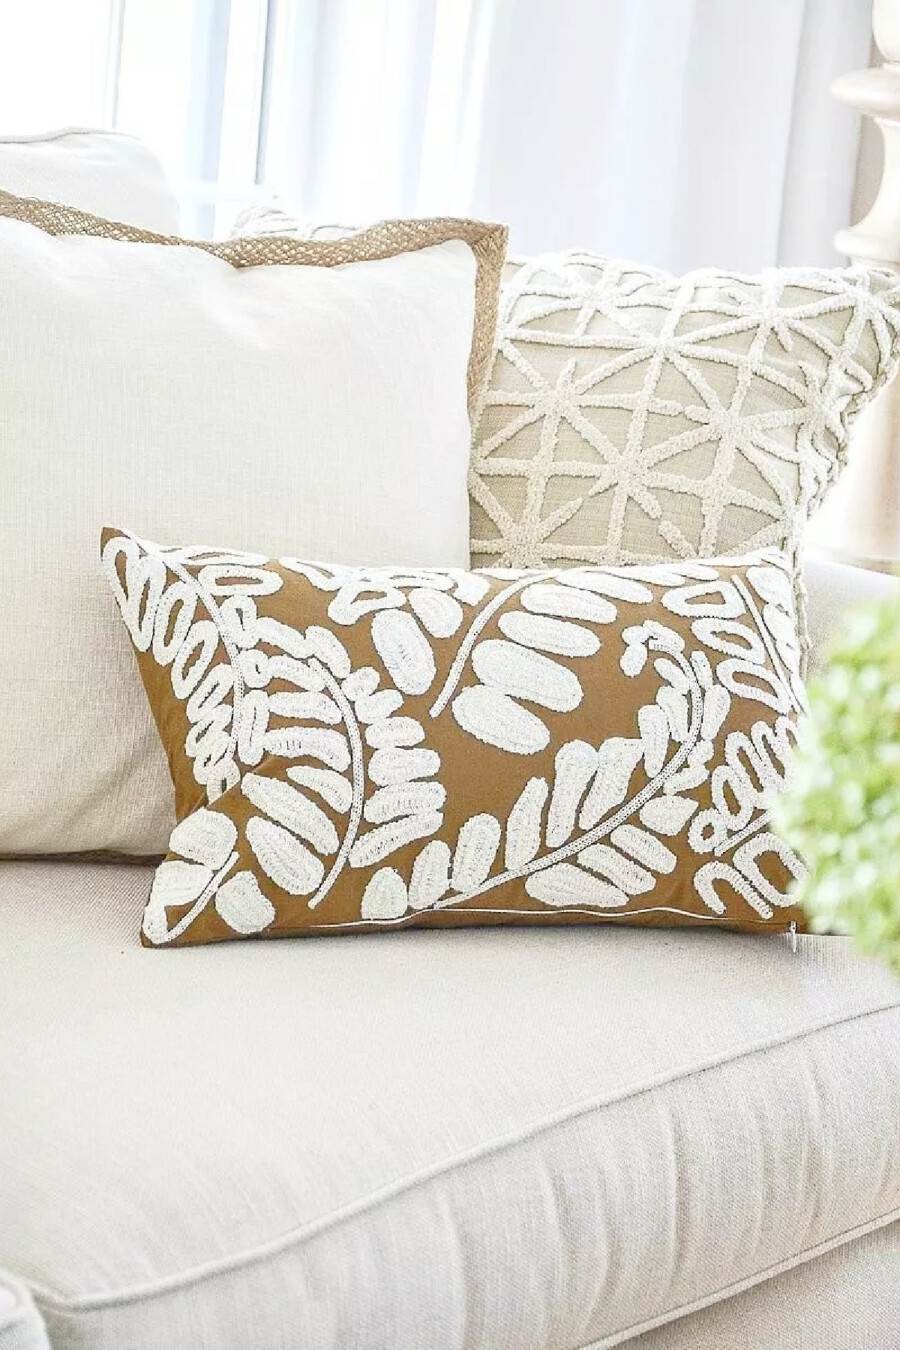 BEAUTIFUL PILLOWS FOR FALL YOU WILL LOVE